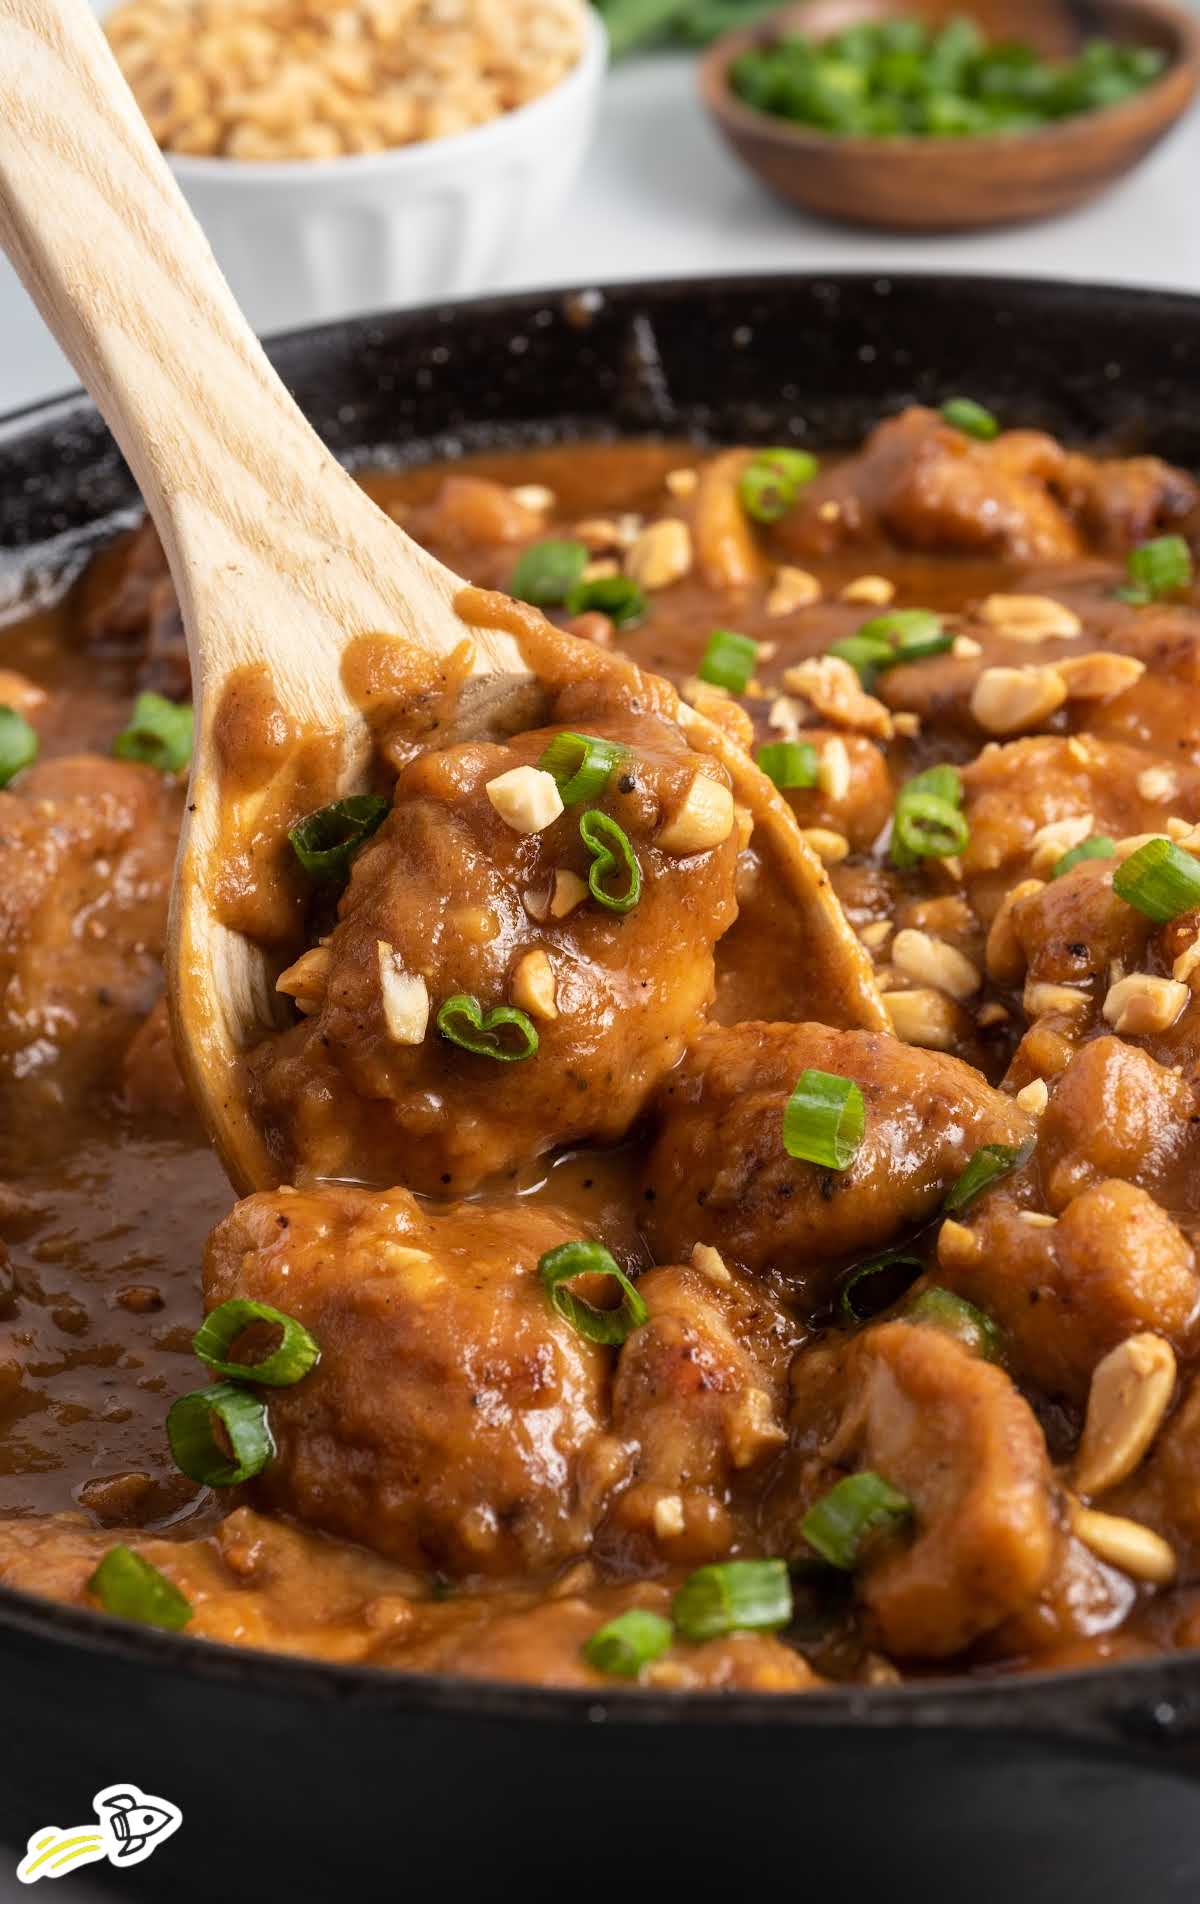 a close up shot of Peanut Butter Chicken in a skillet with a wooden spoon grabbing some